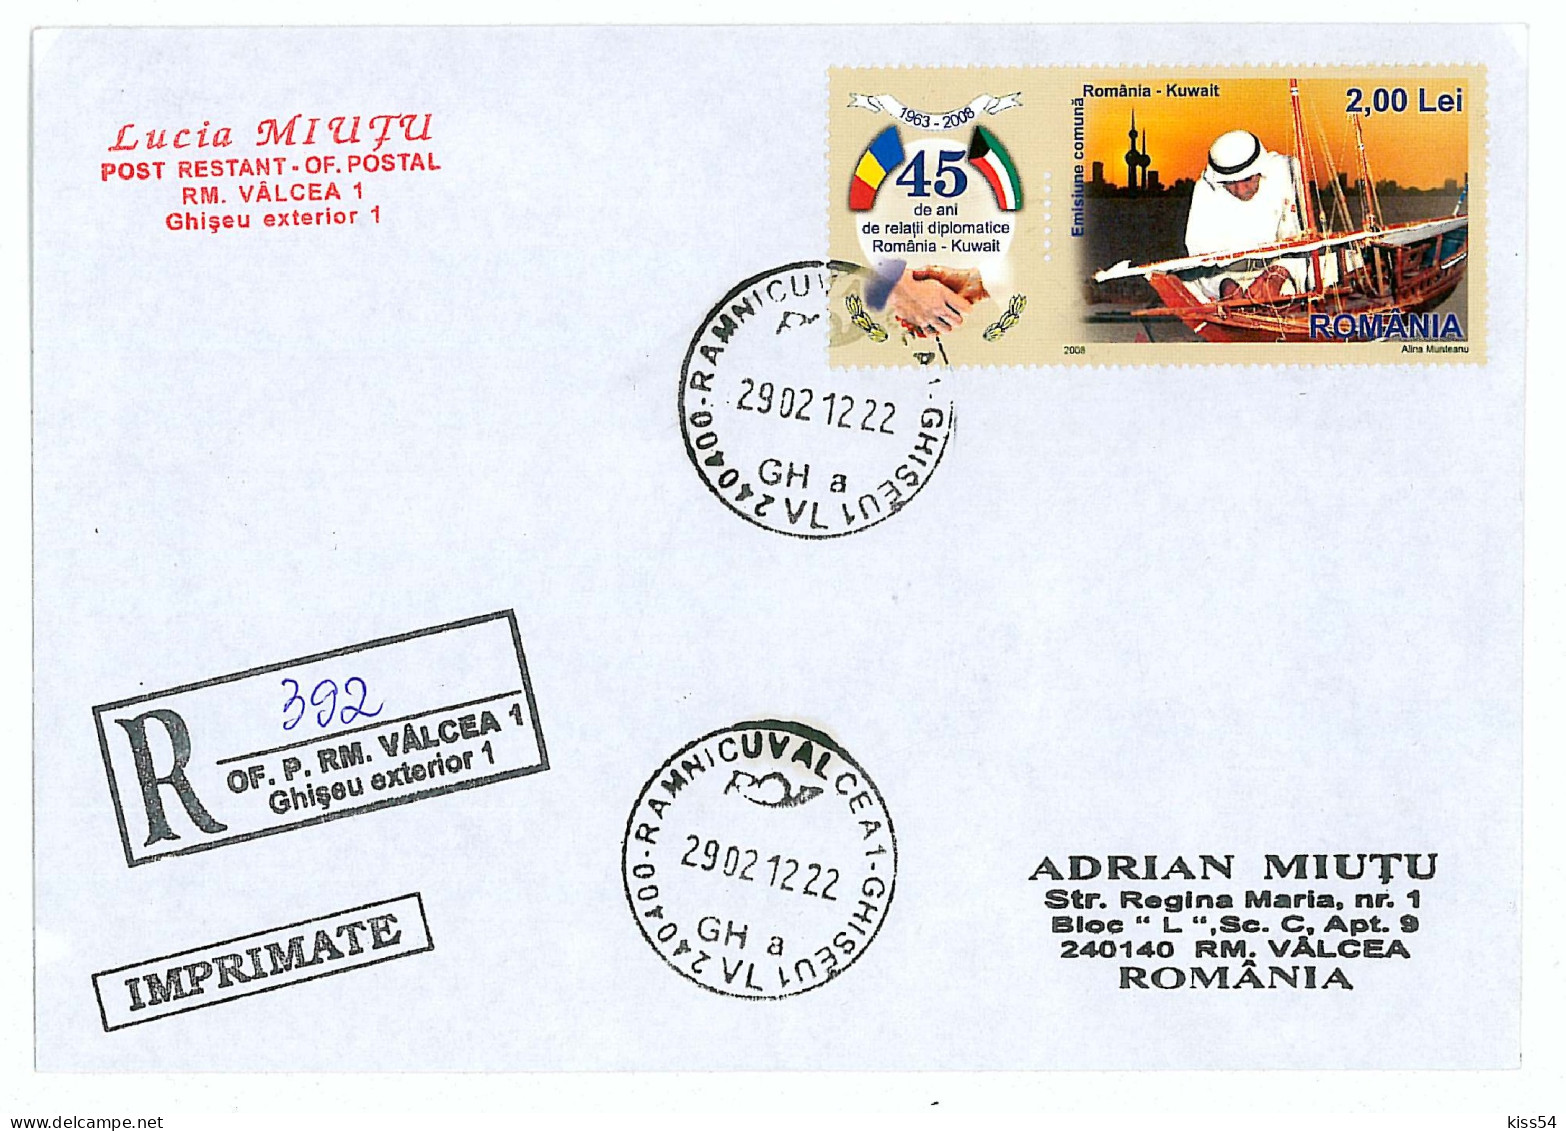 NCP 22 - 392-a Romania - Kuwait, FRIENDSHIP - Registered, Stamp With Vignette - 2012 - Covers & Documents